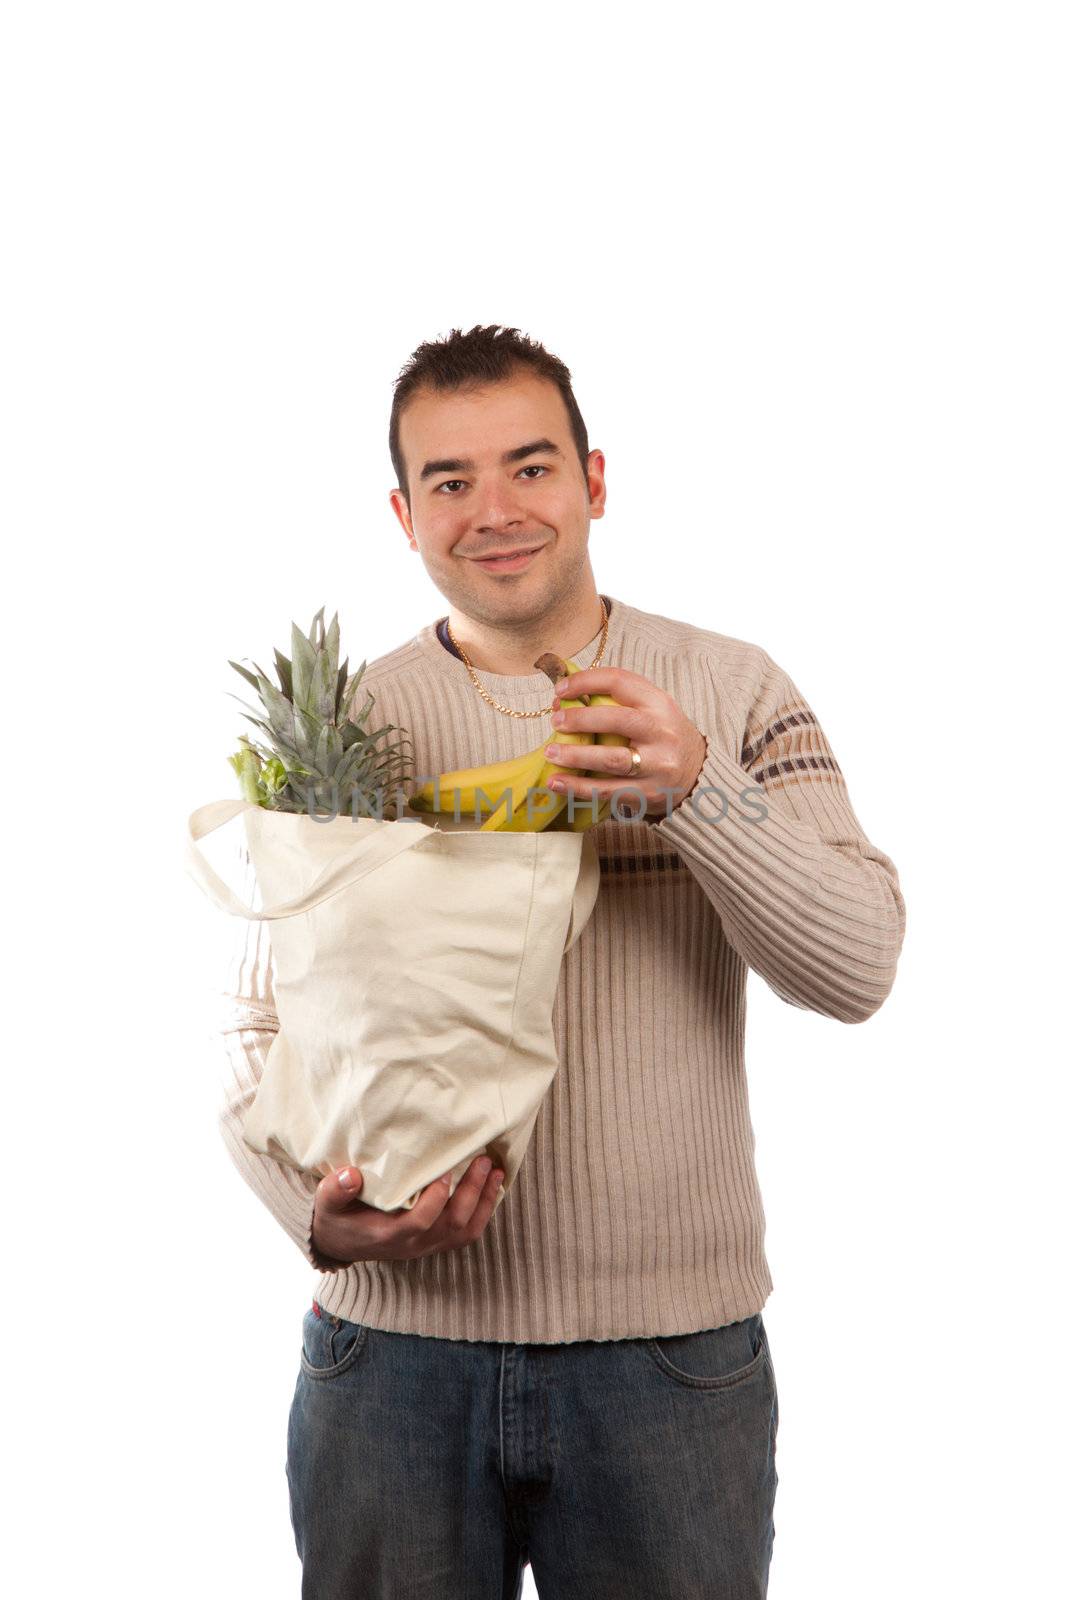 White male grocery shopper smiling while holding a canvas bag full of fresh food items.